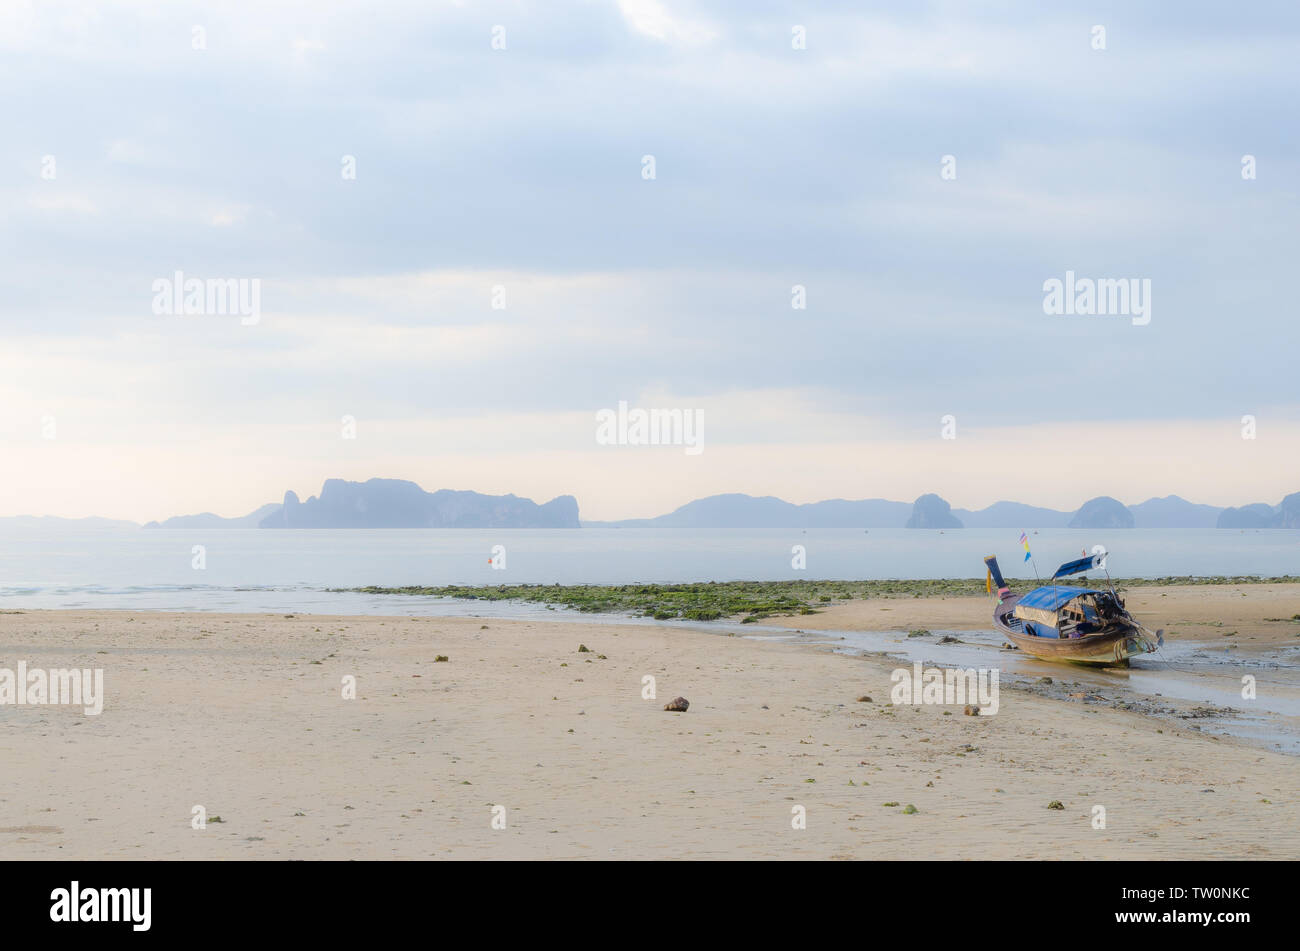 Thai long-tail boats on beach at sunset Stock Photo